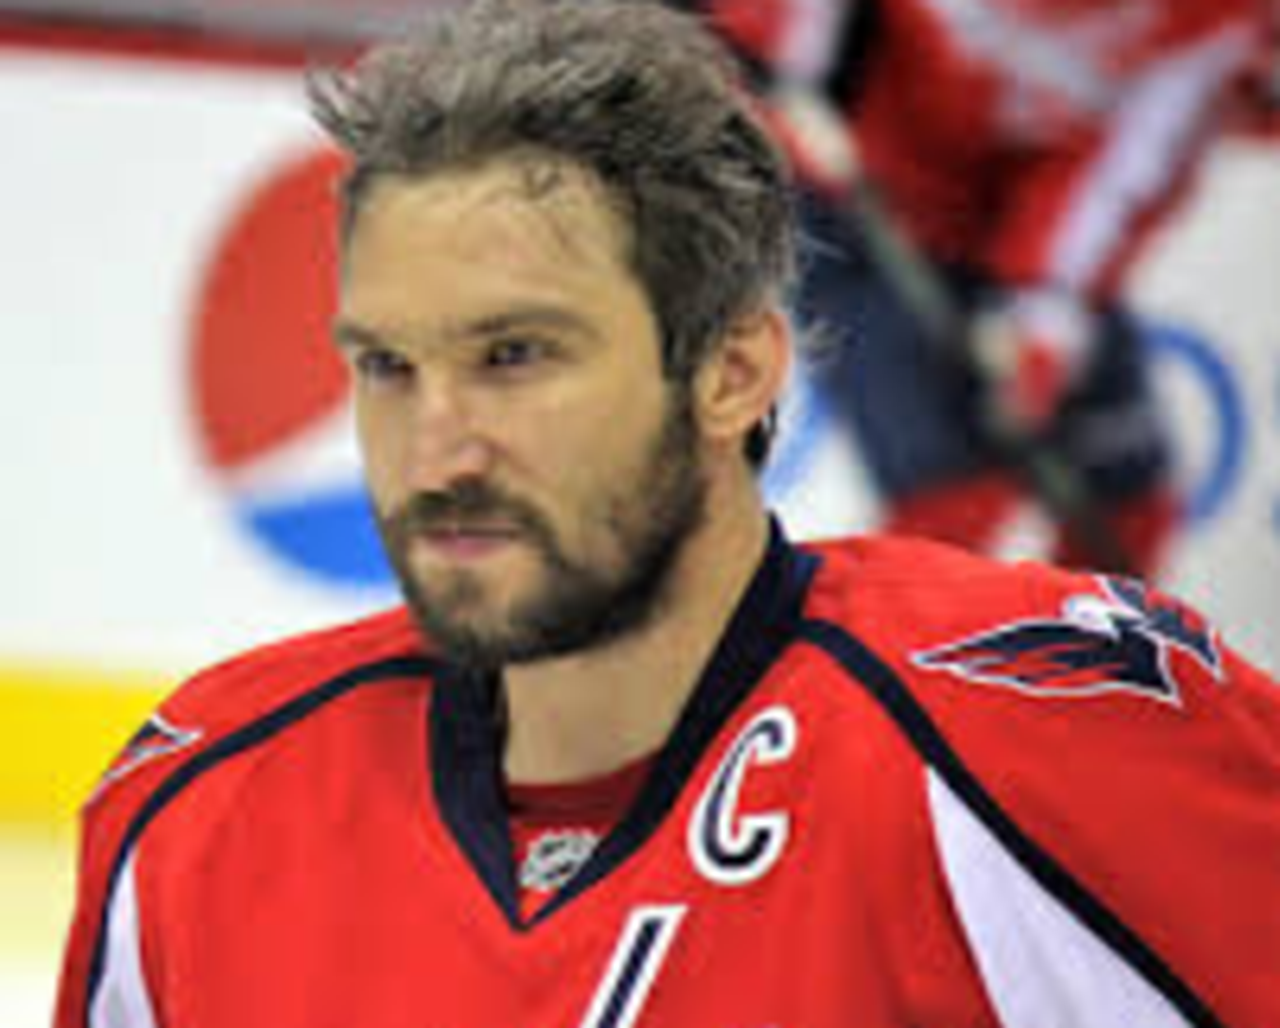 Ovechkin nets 2, ties Jagr for 3rd on NHL career goals list - The